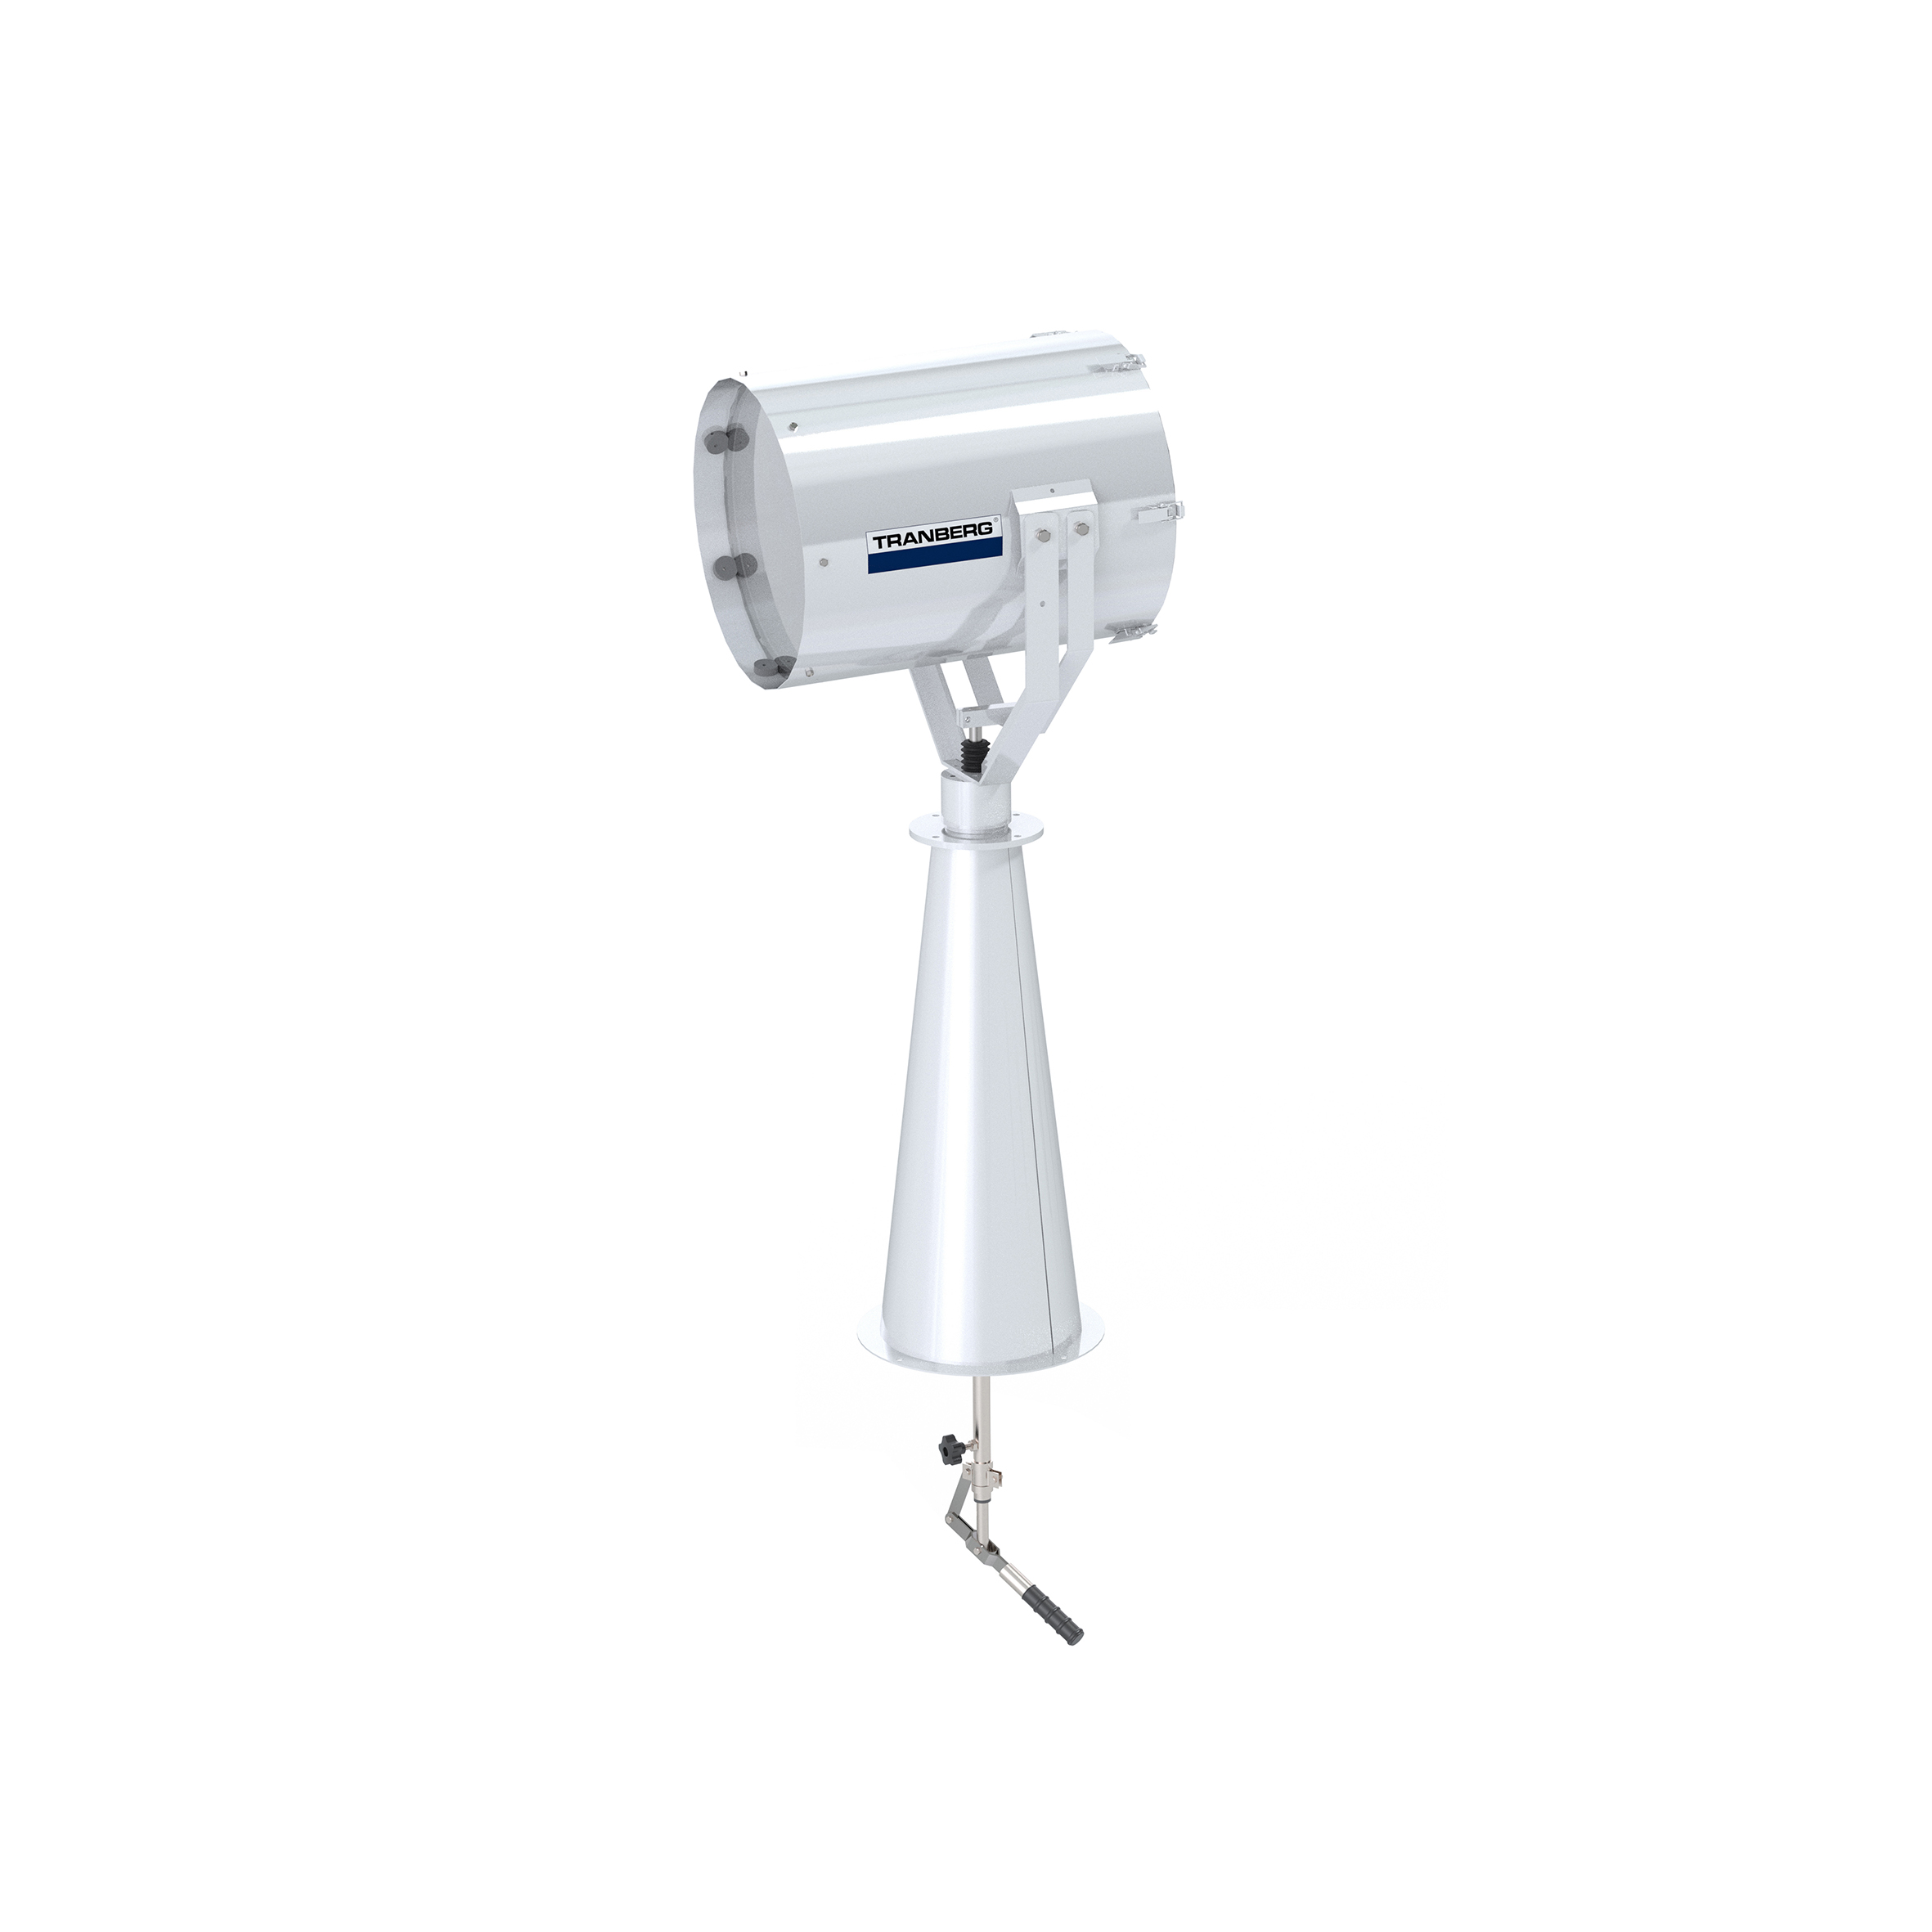 TEF 2630 Searchlight: Xenon 1600W bulb incl, 230V, Bridge Controlled, Stainless Steel, W/800 mm pede photo